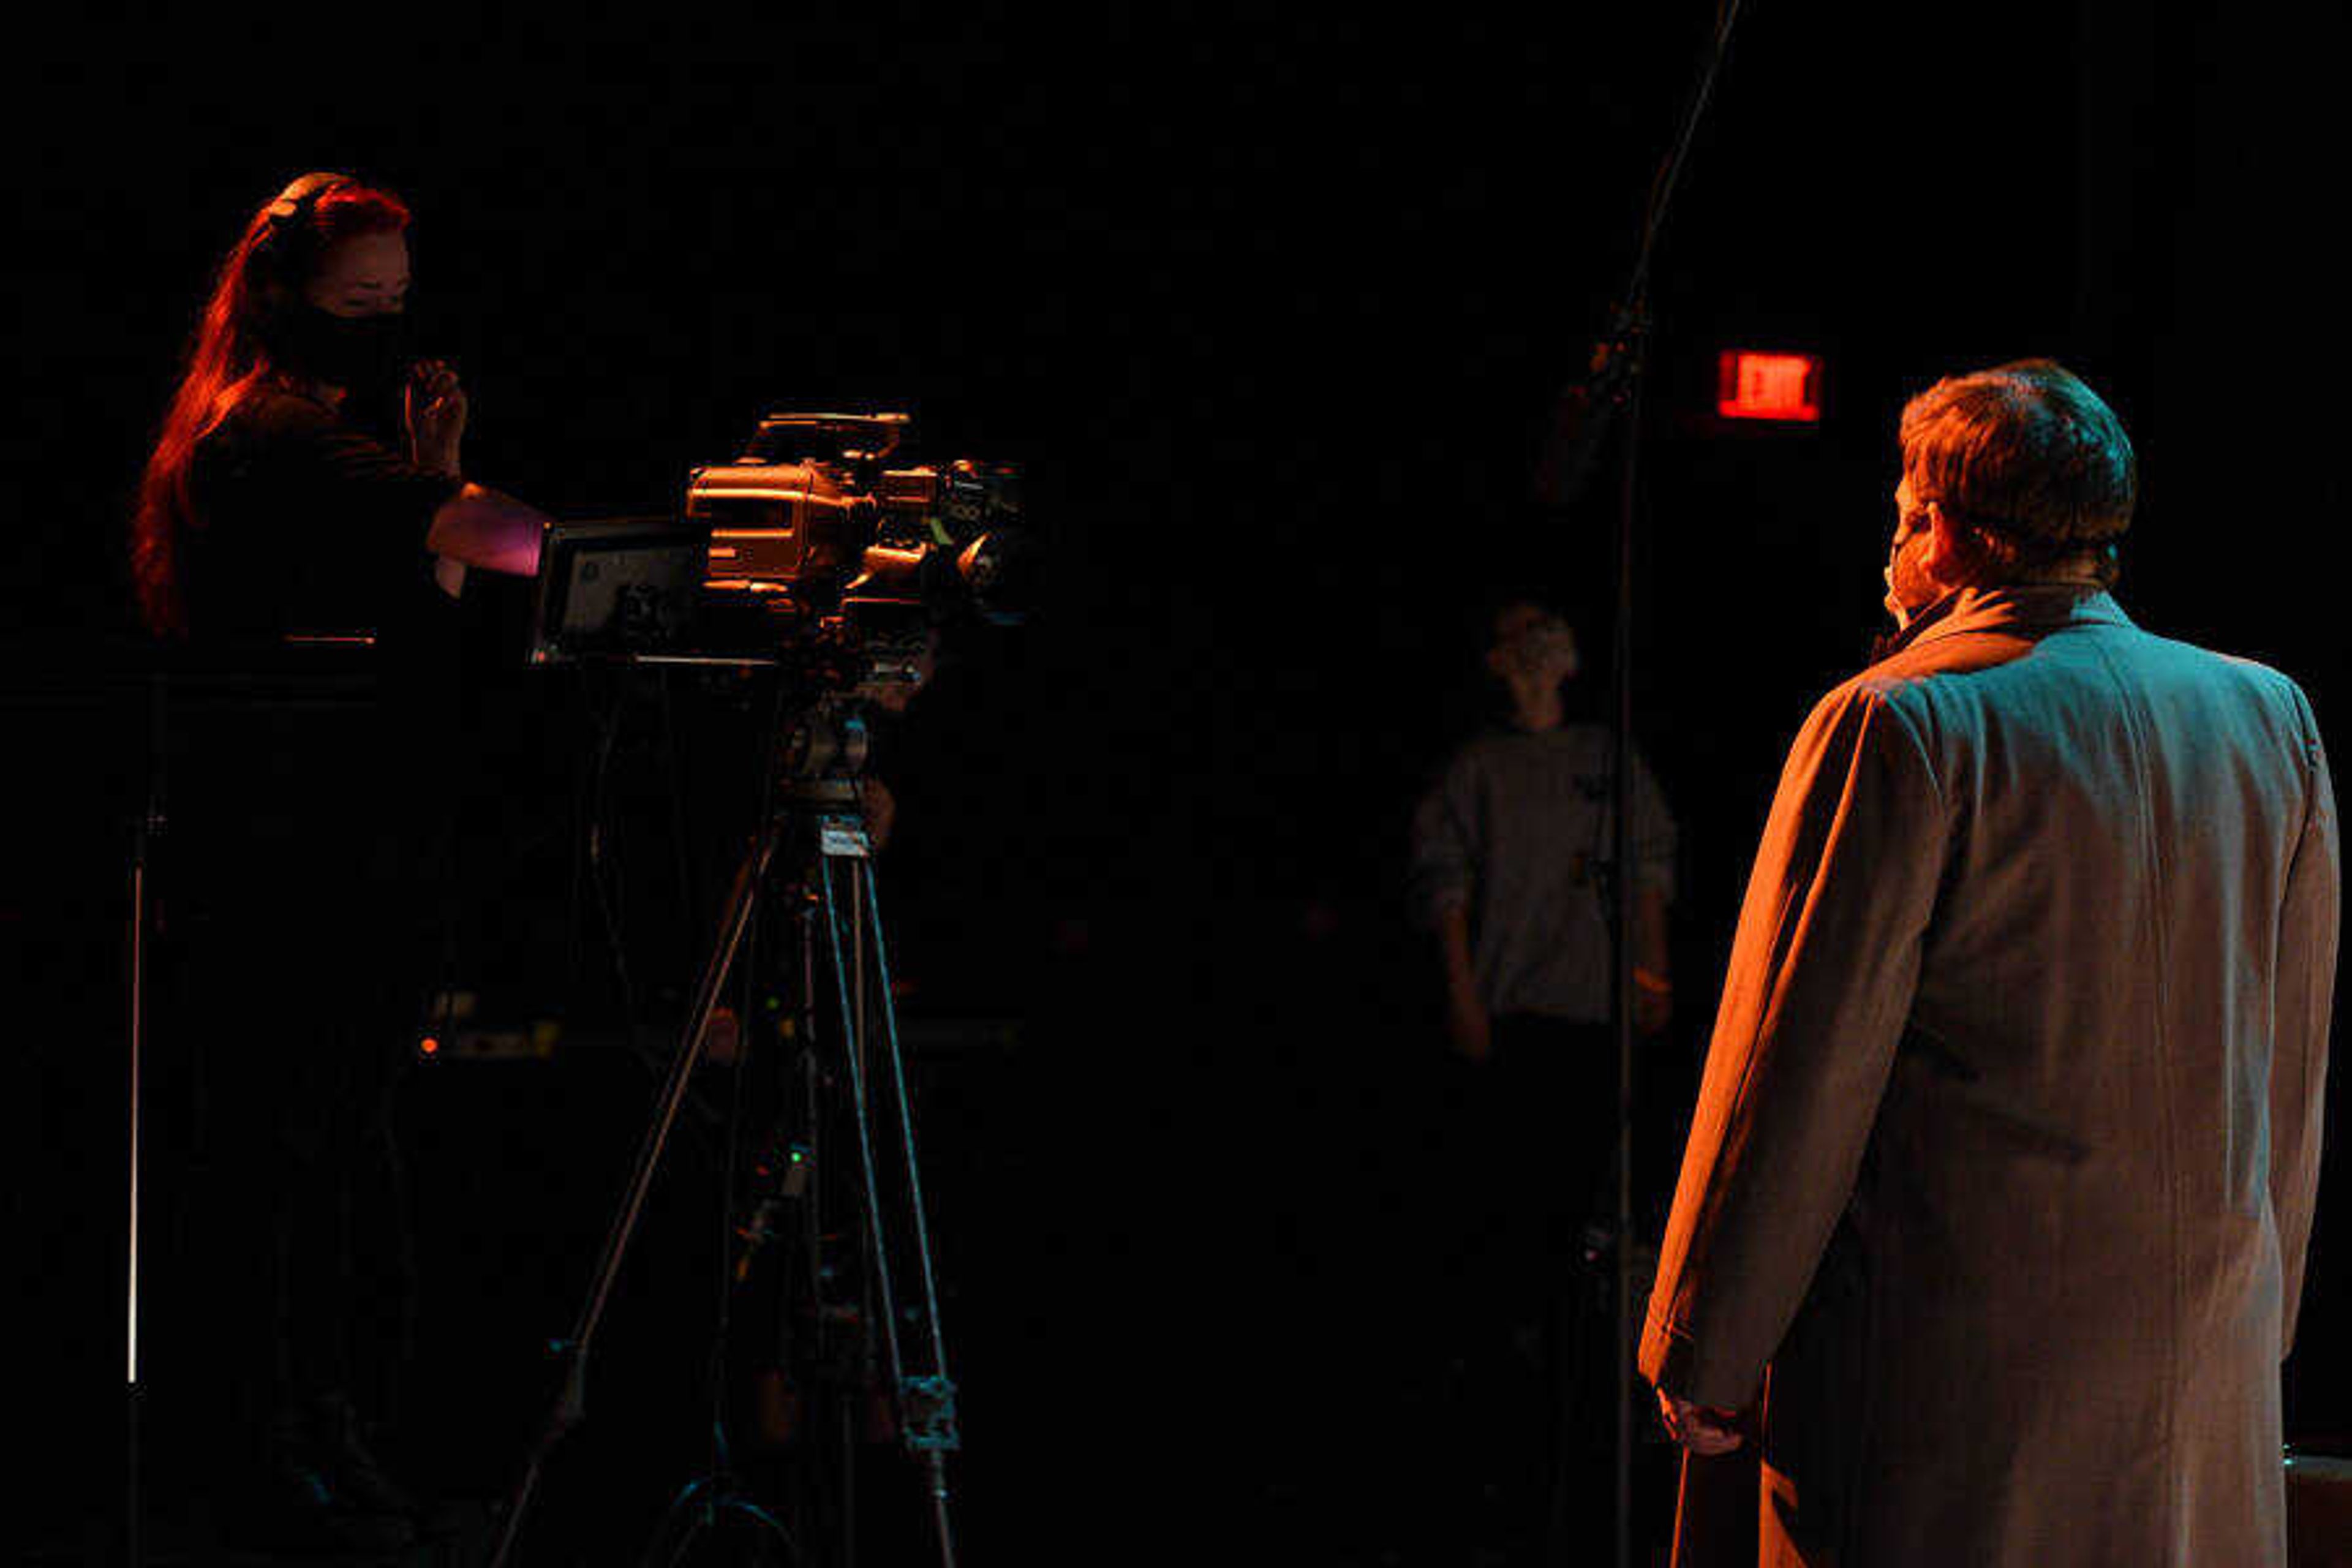 Students involved in "The New Normal" were presented with a new opportunity, the ability to film and edit each other's performances. The production had a three-camera setup and a team on the soundboard.